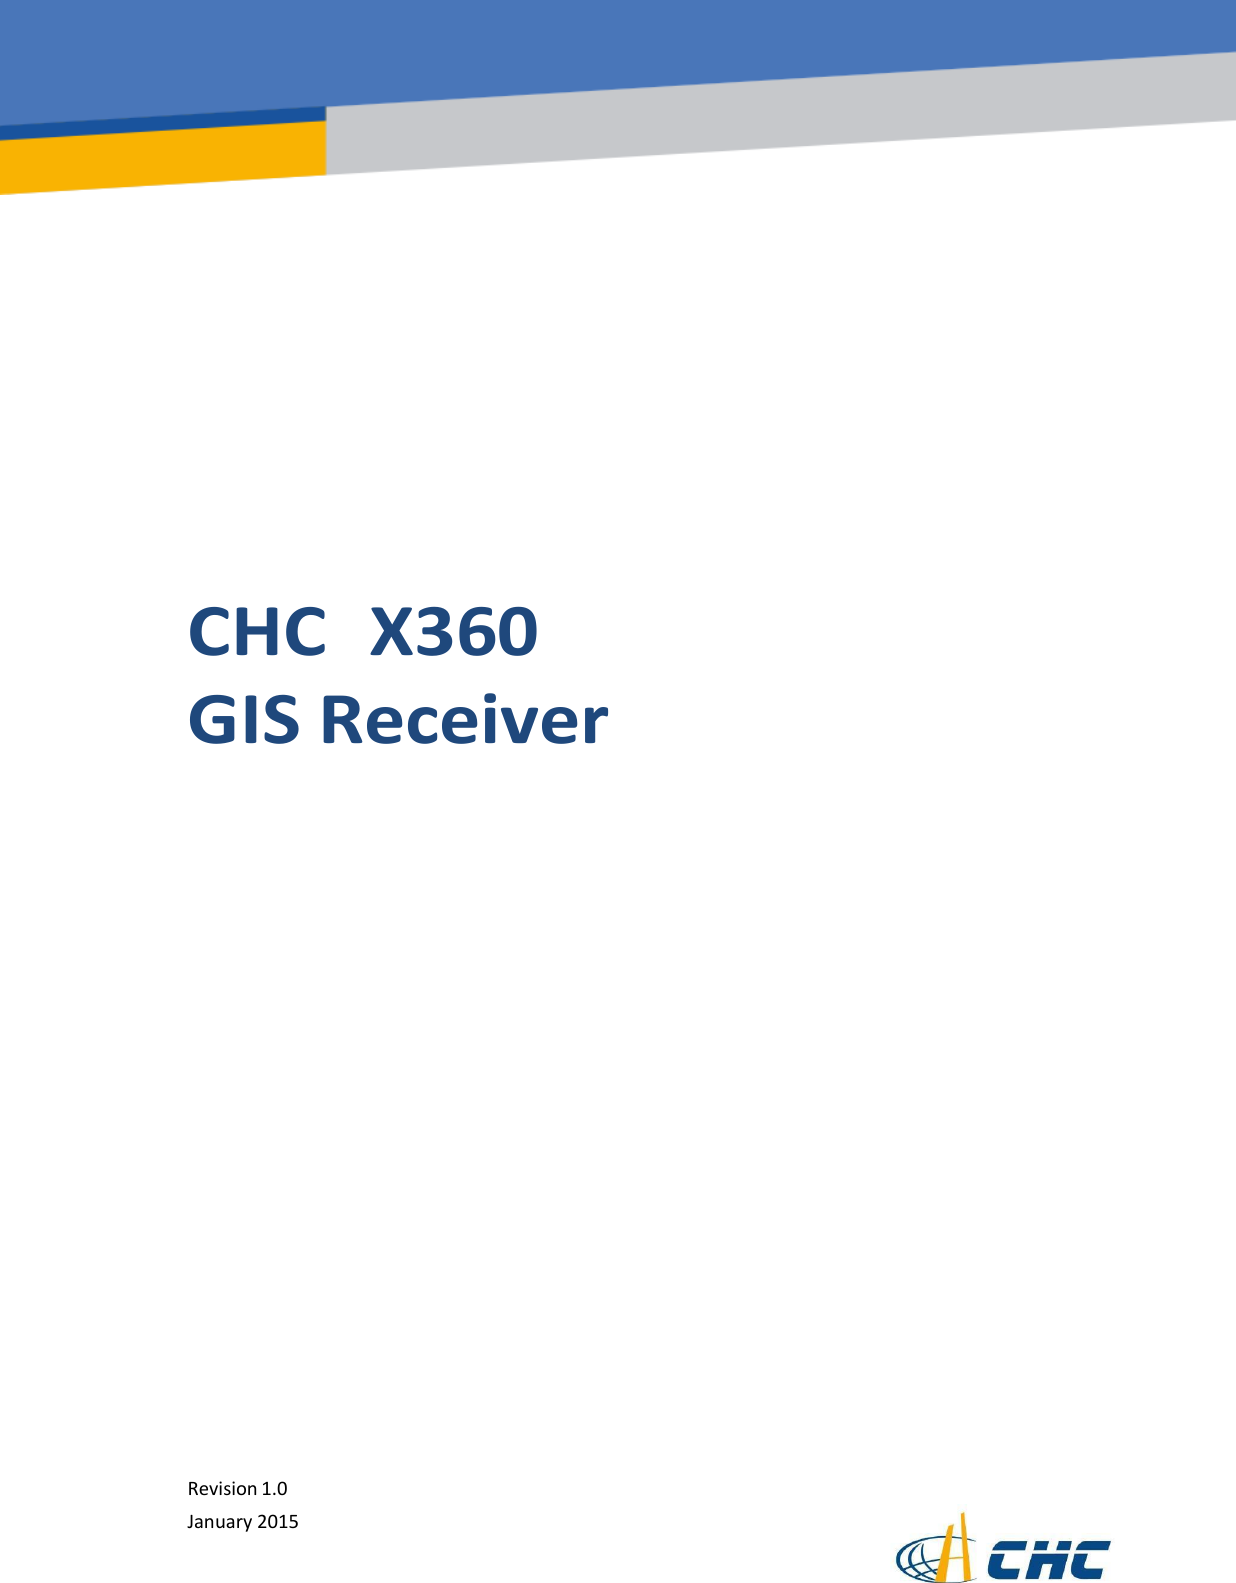    Safety Information  il                           CHC  X360   GIS Receiver         Revision 1.0 January 2015   